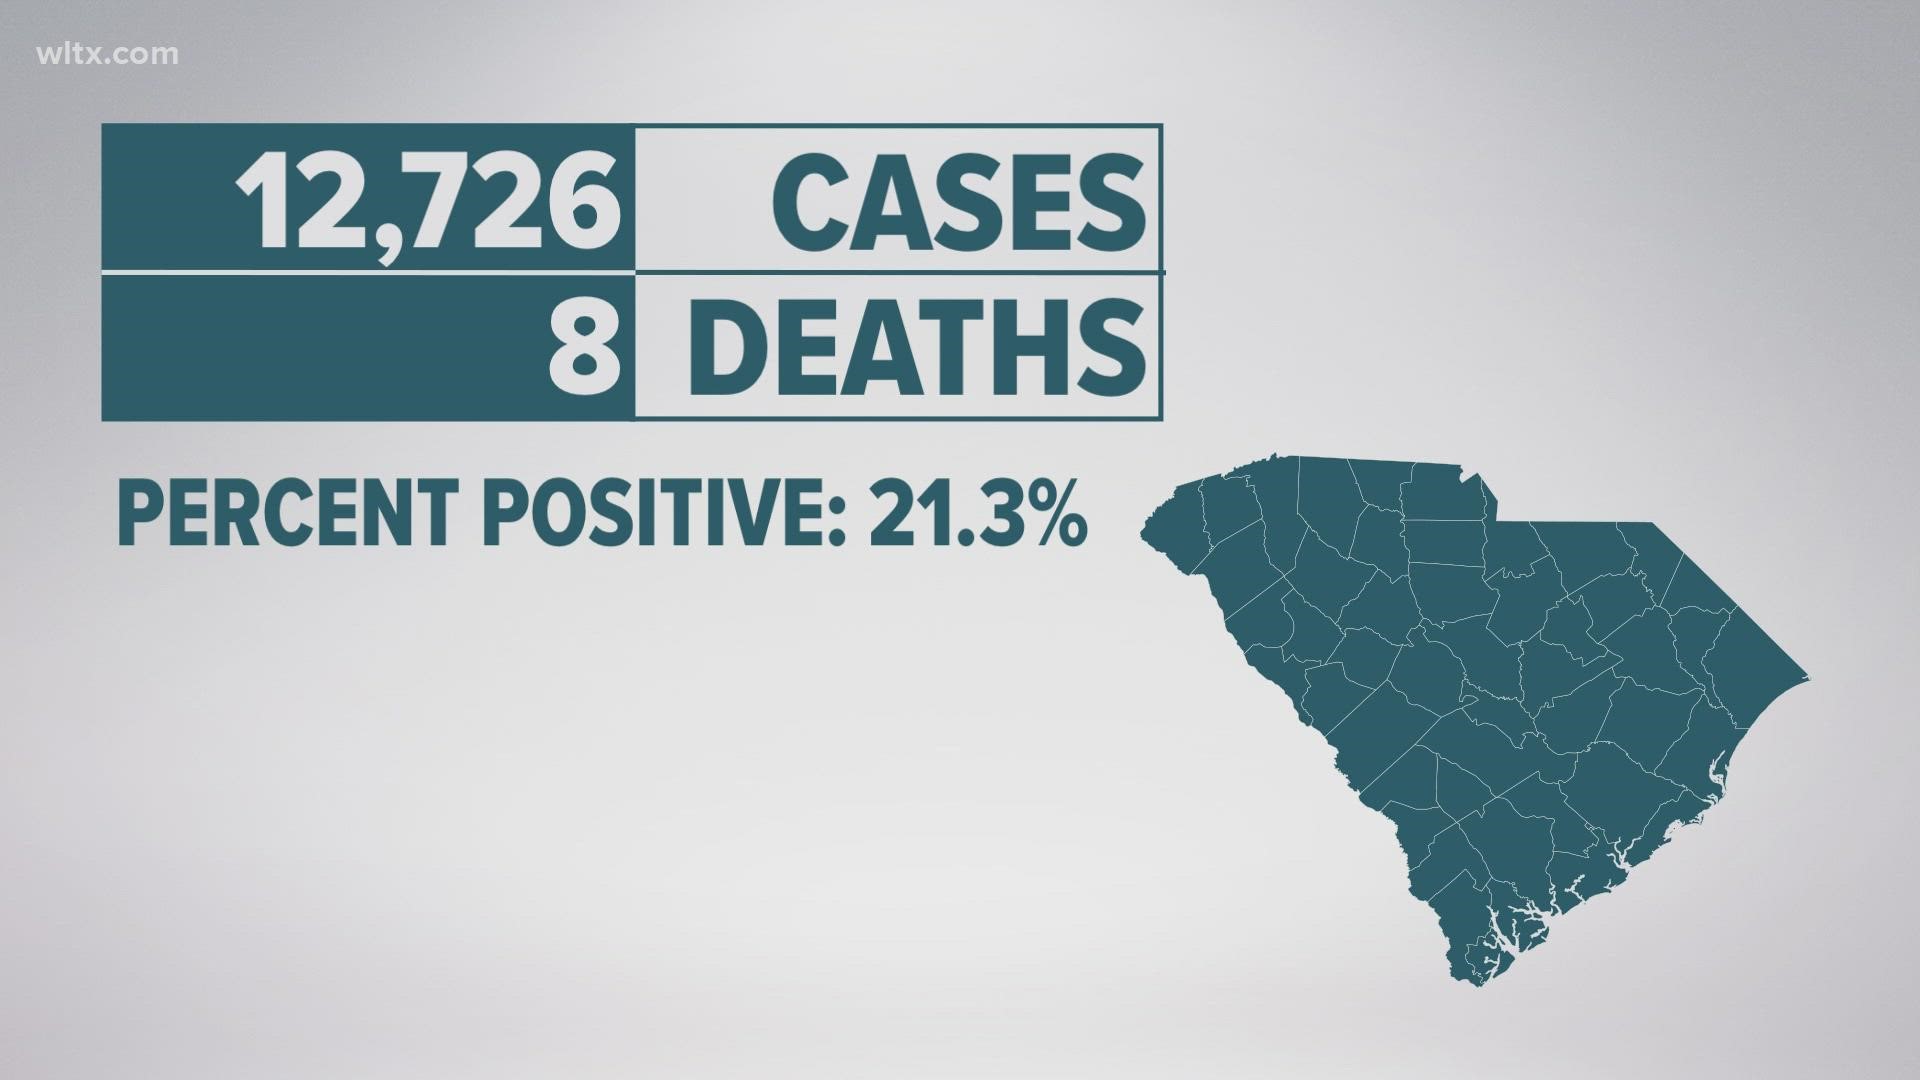 DHEC reports that over 12,000 new COVID-19 cases were confirmed across the state last week.